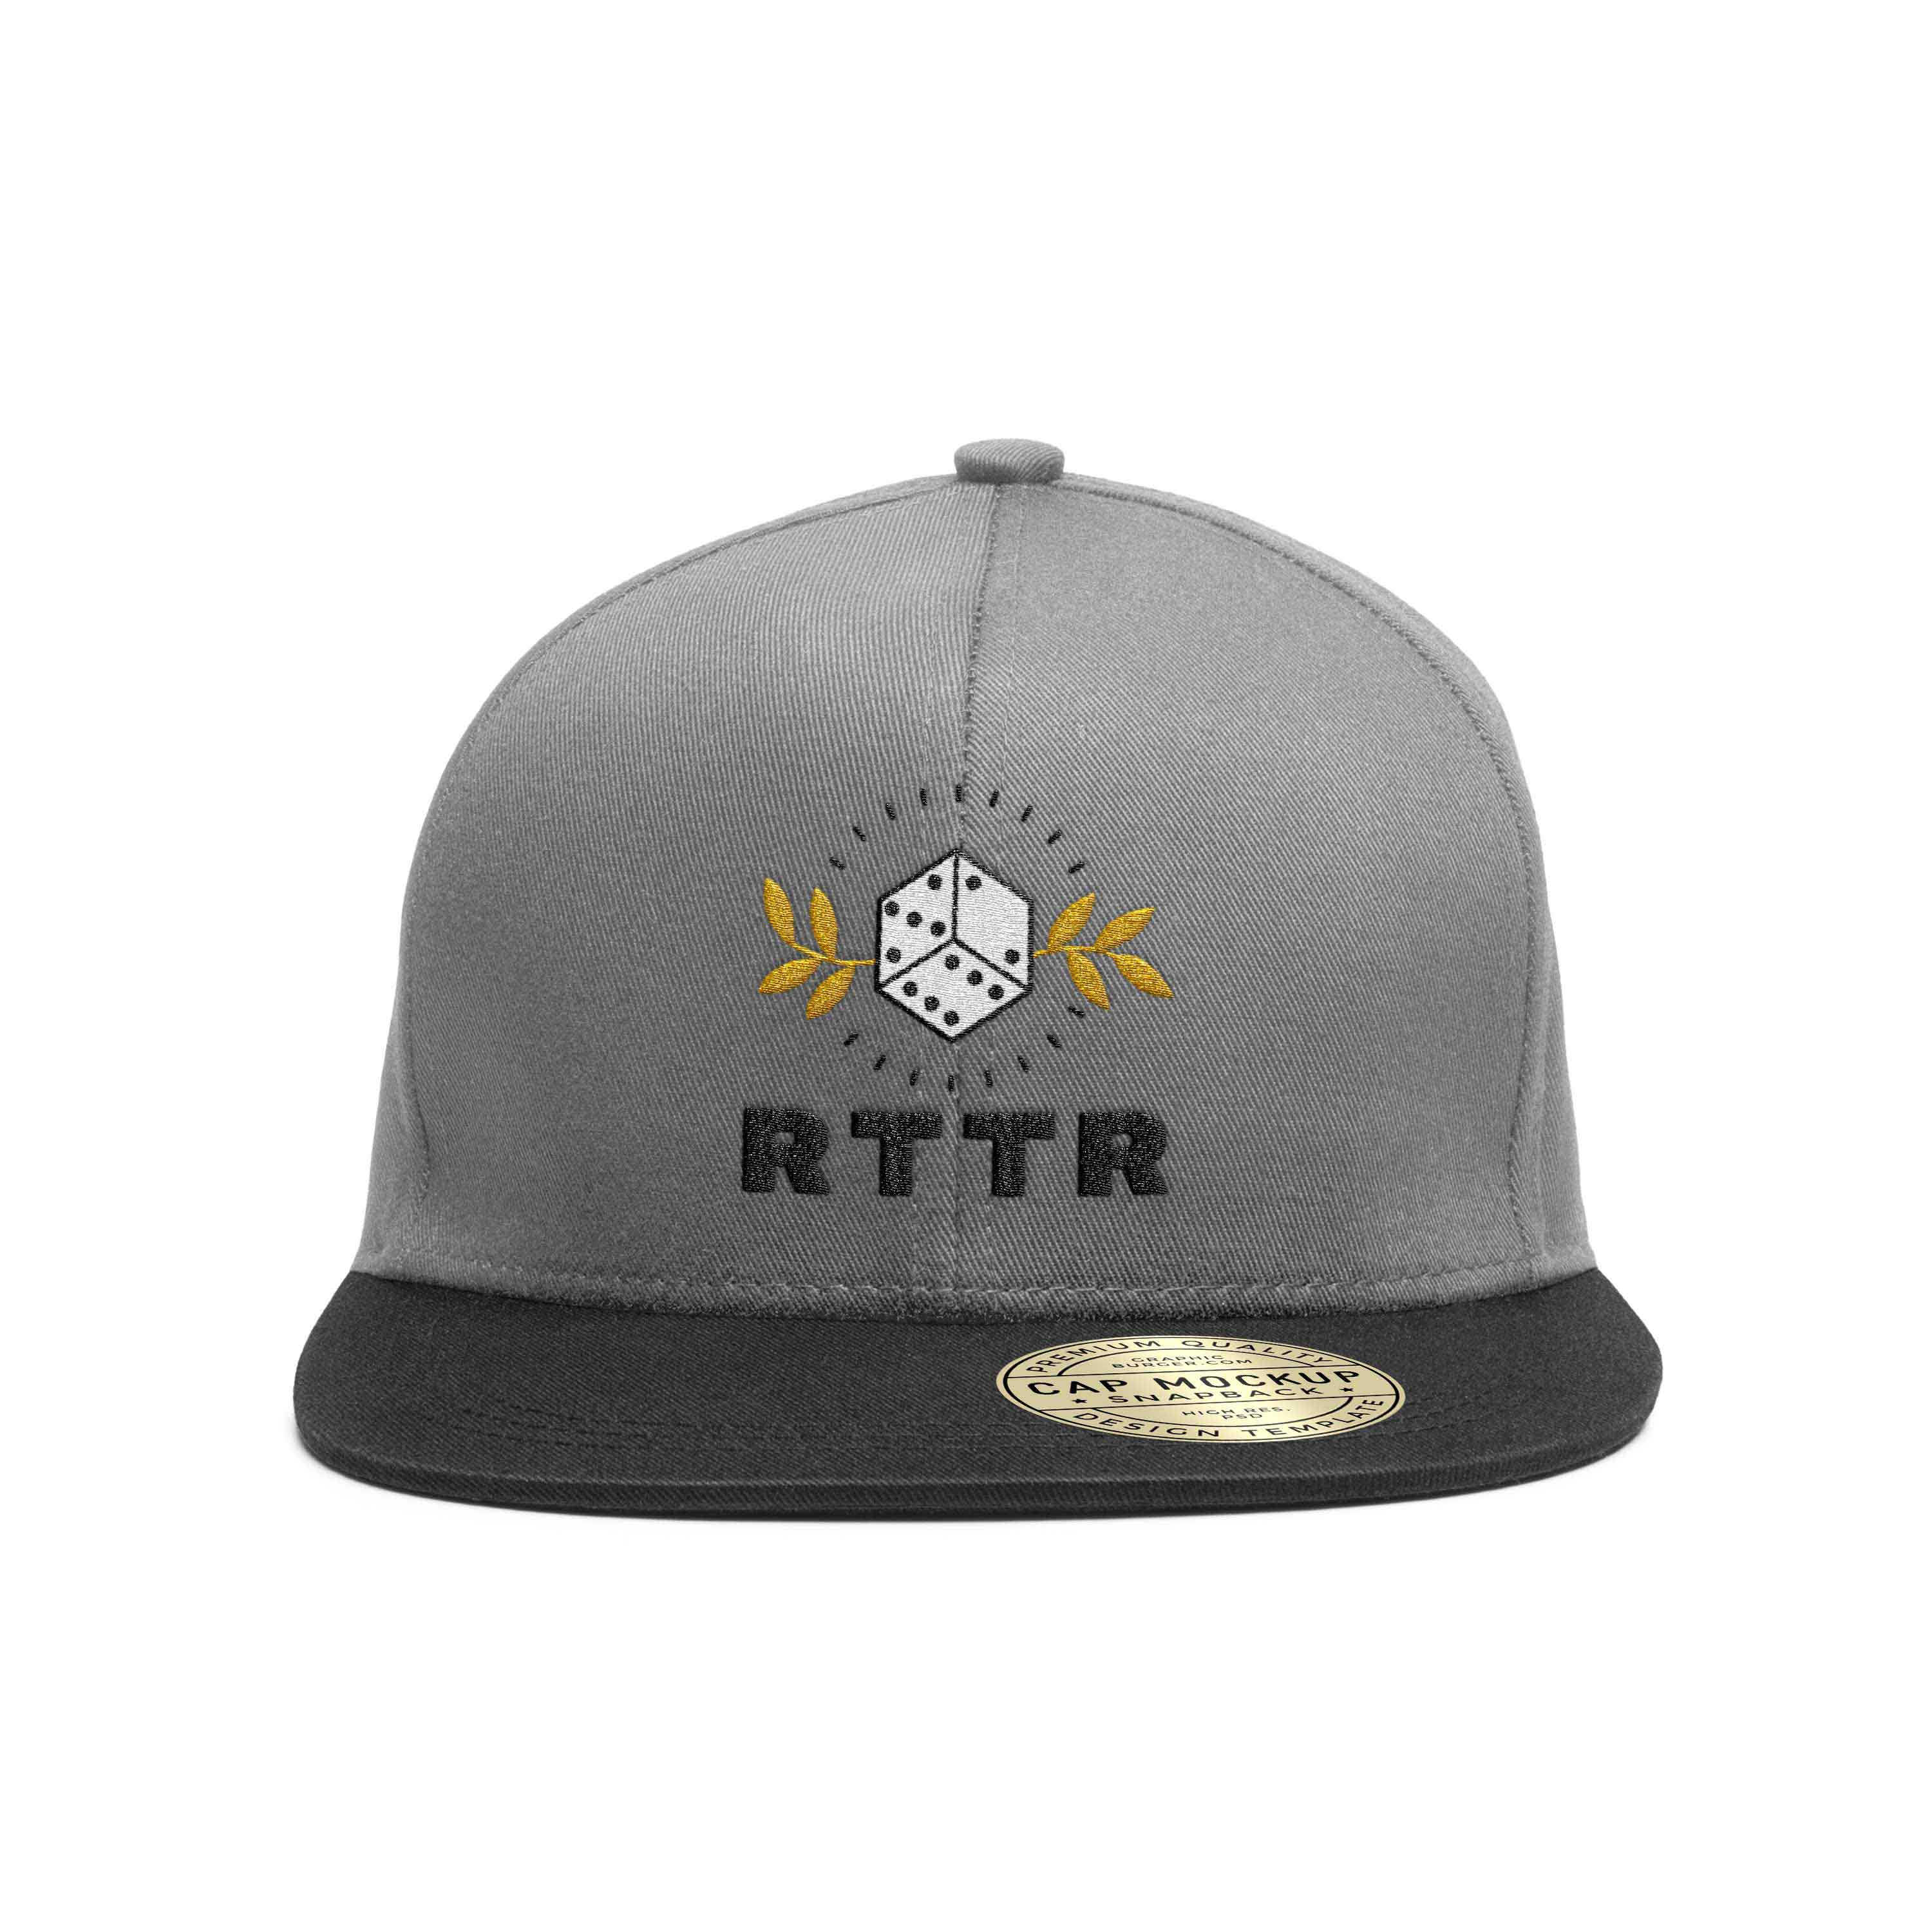 Image of the new RTTR logo applied to a hat